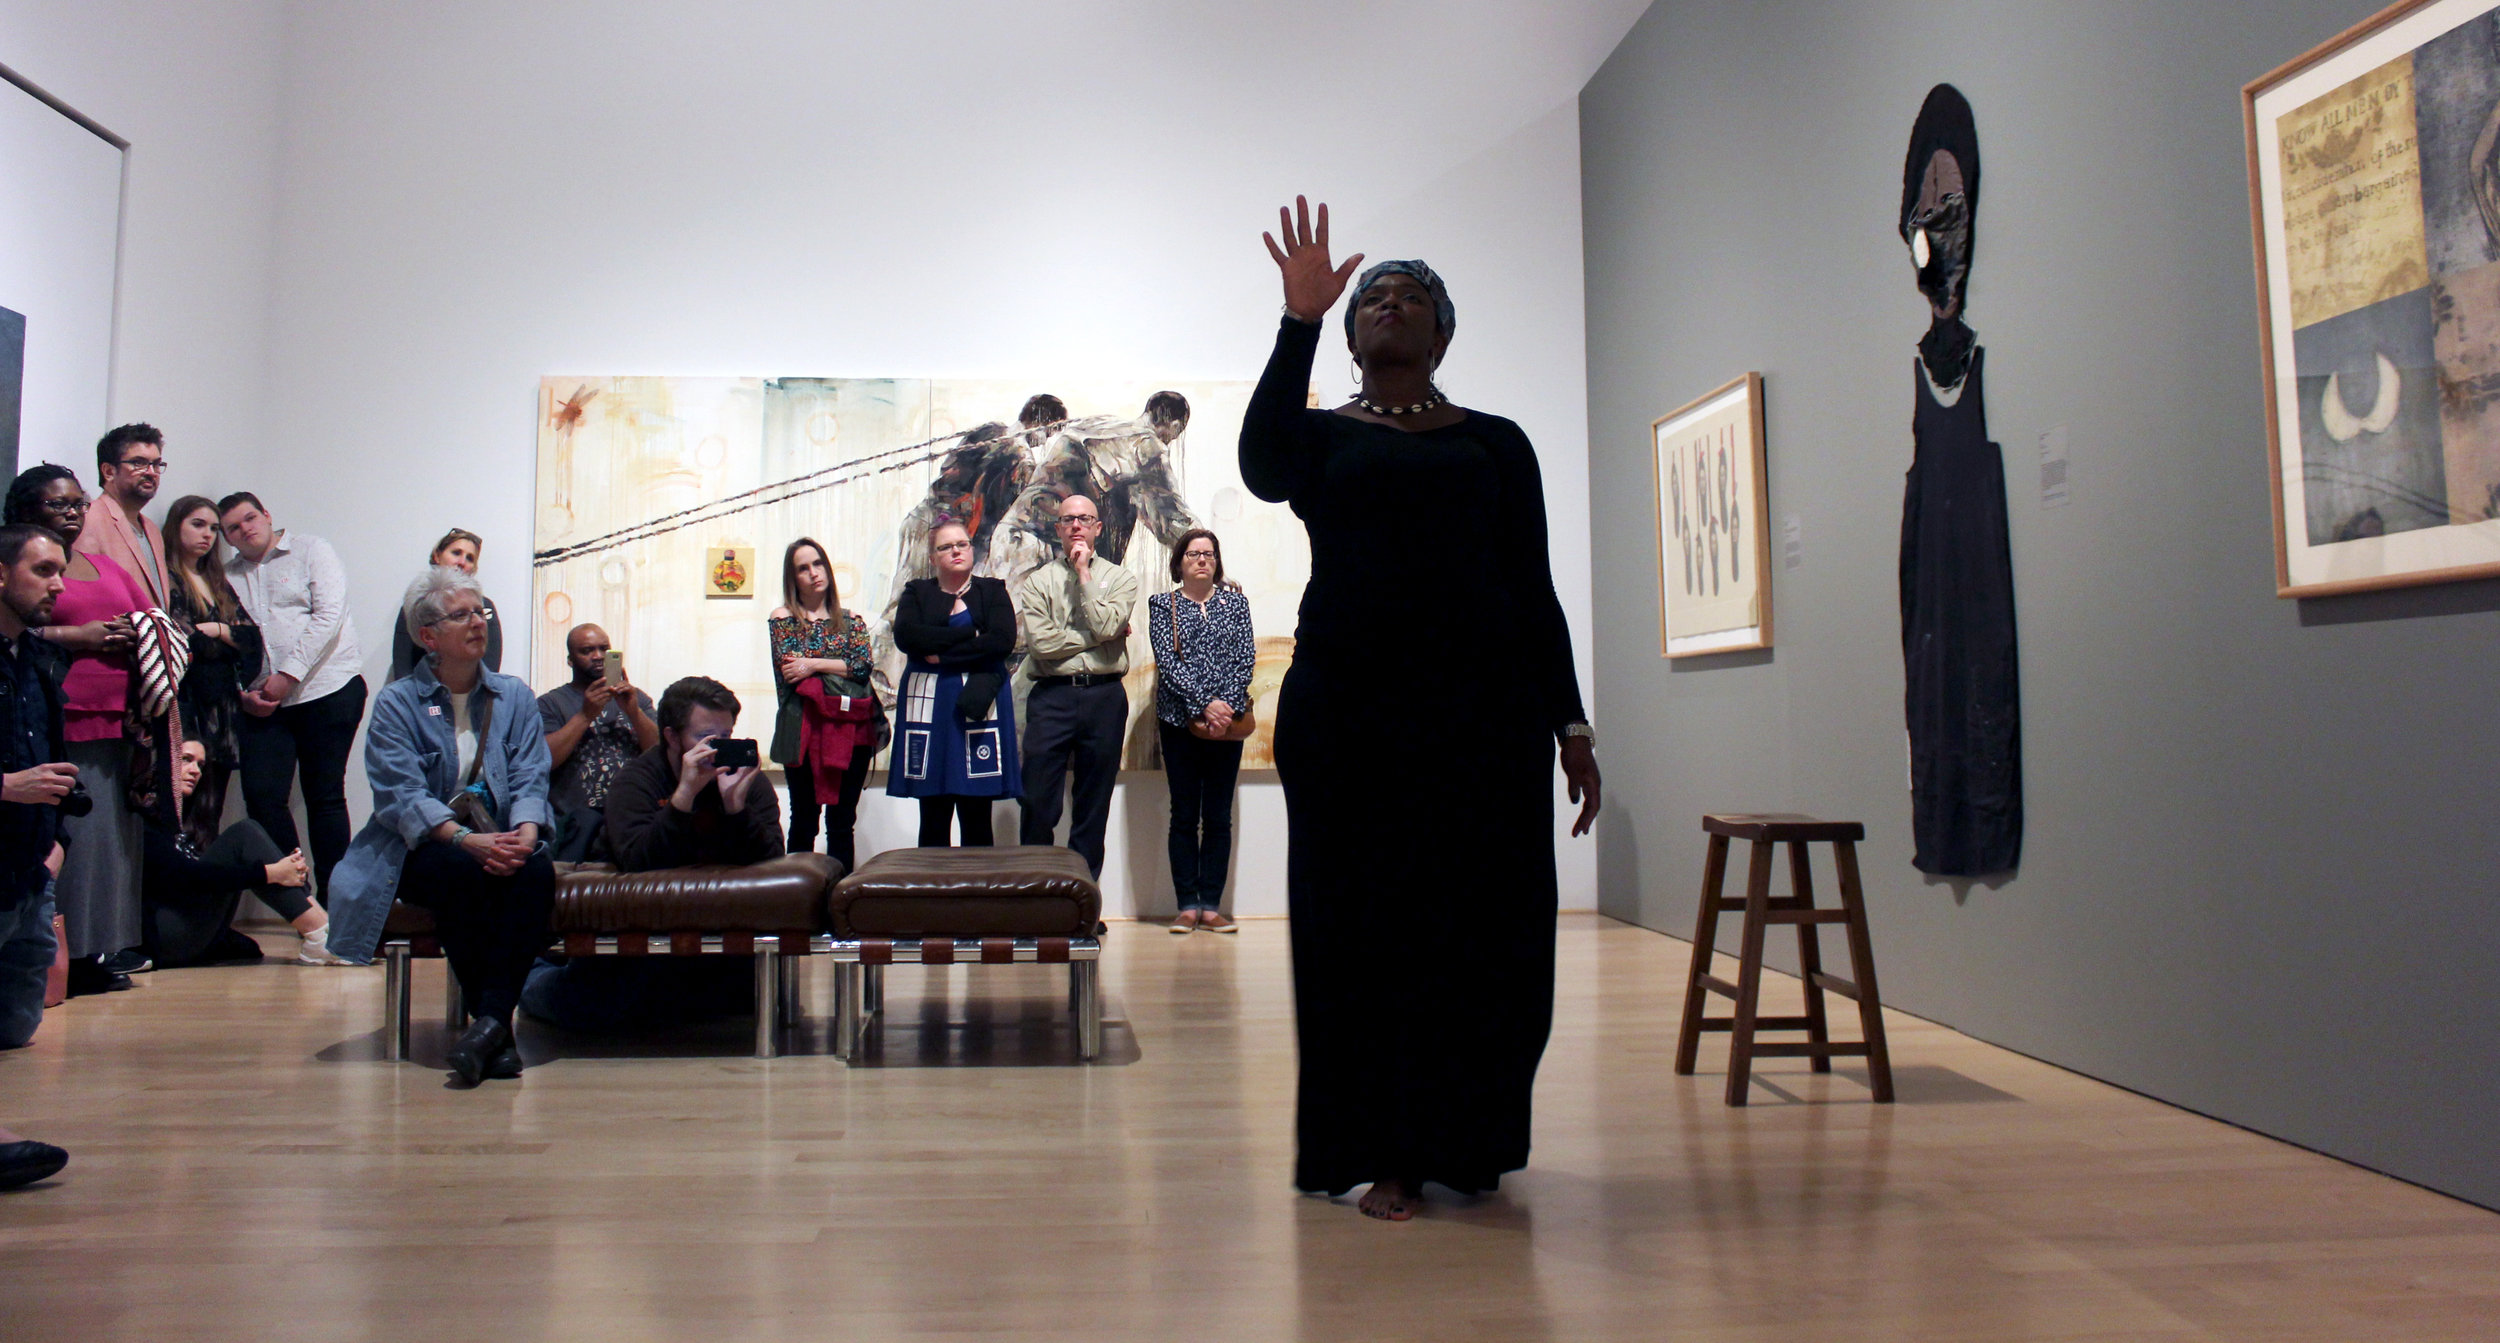 Woman performing in a gallery room full of people.